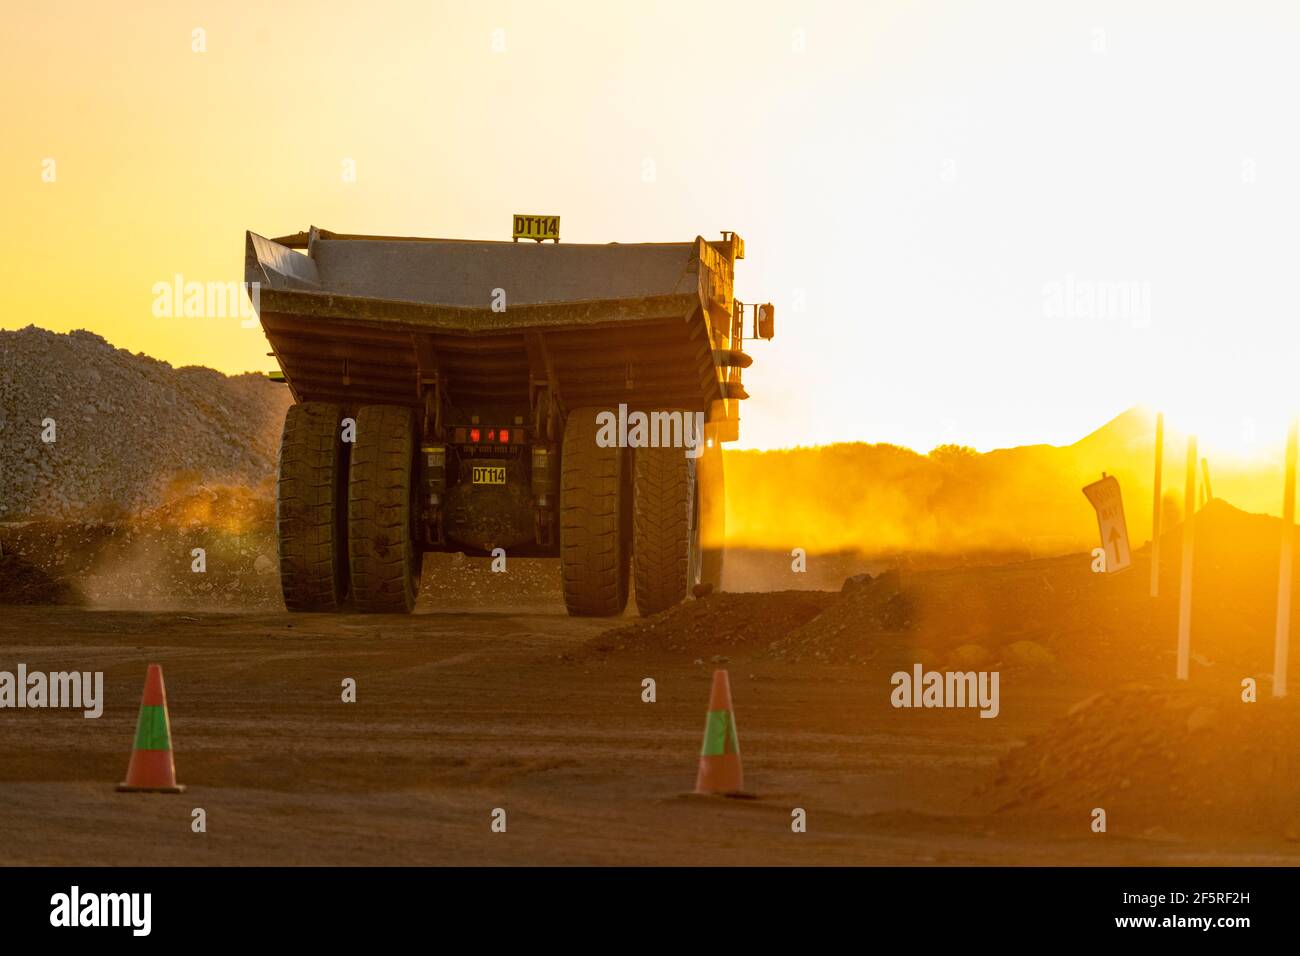 Dump truck driving on haul road at sunset at open pit mining area. Stock Photo